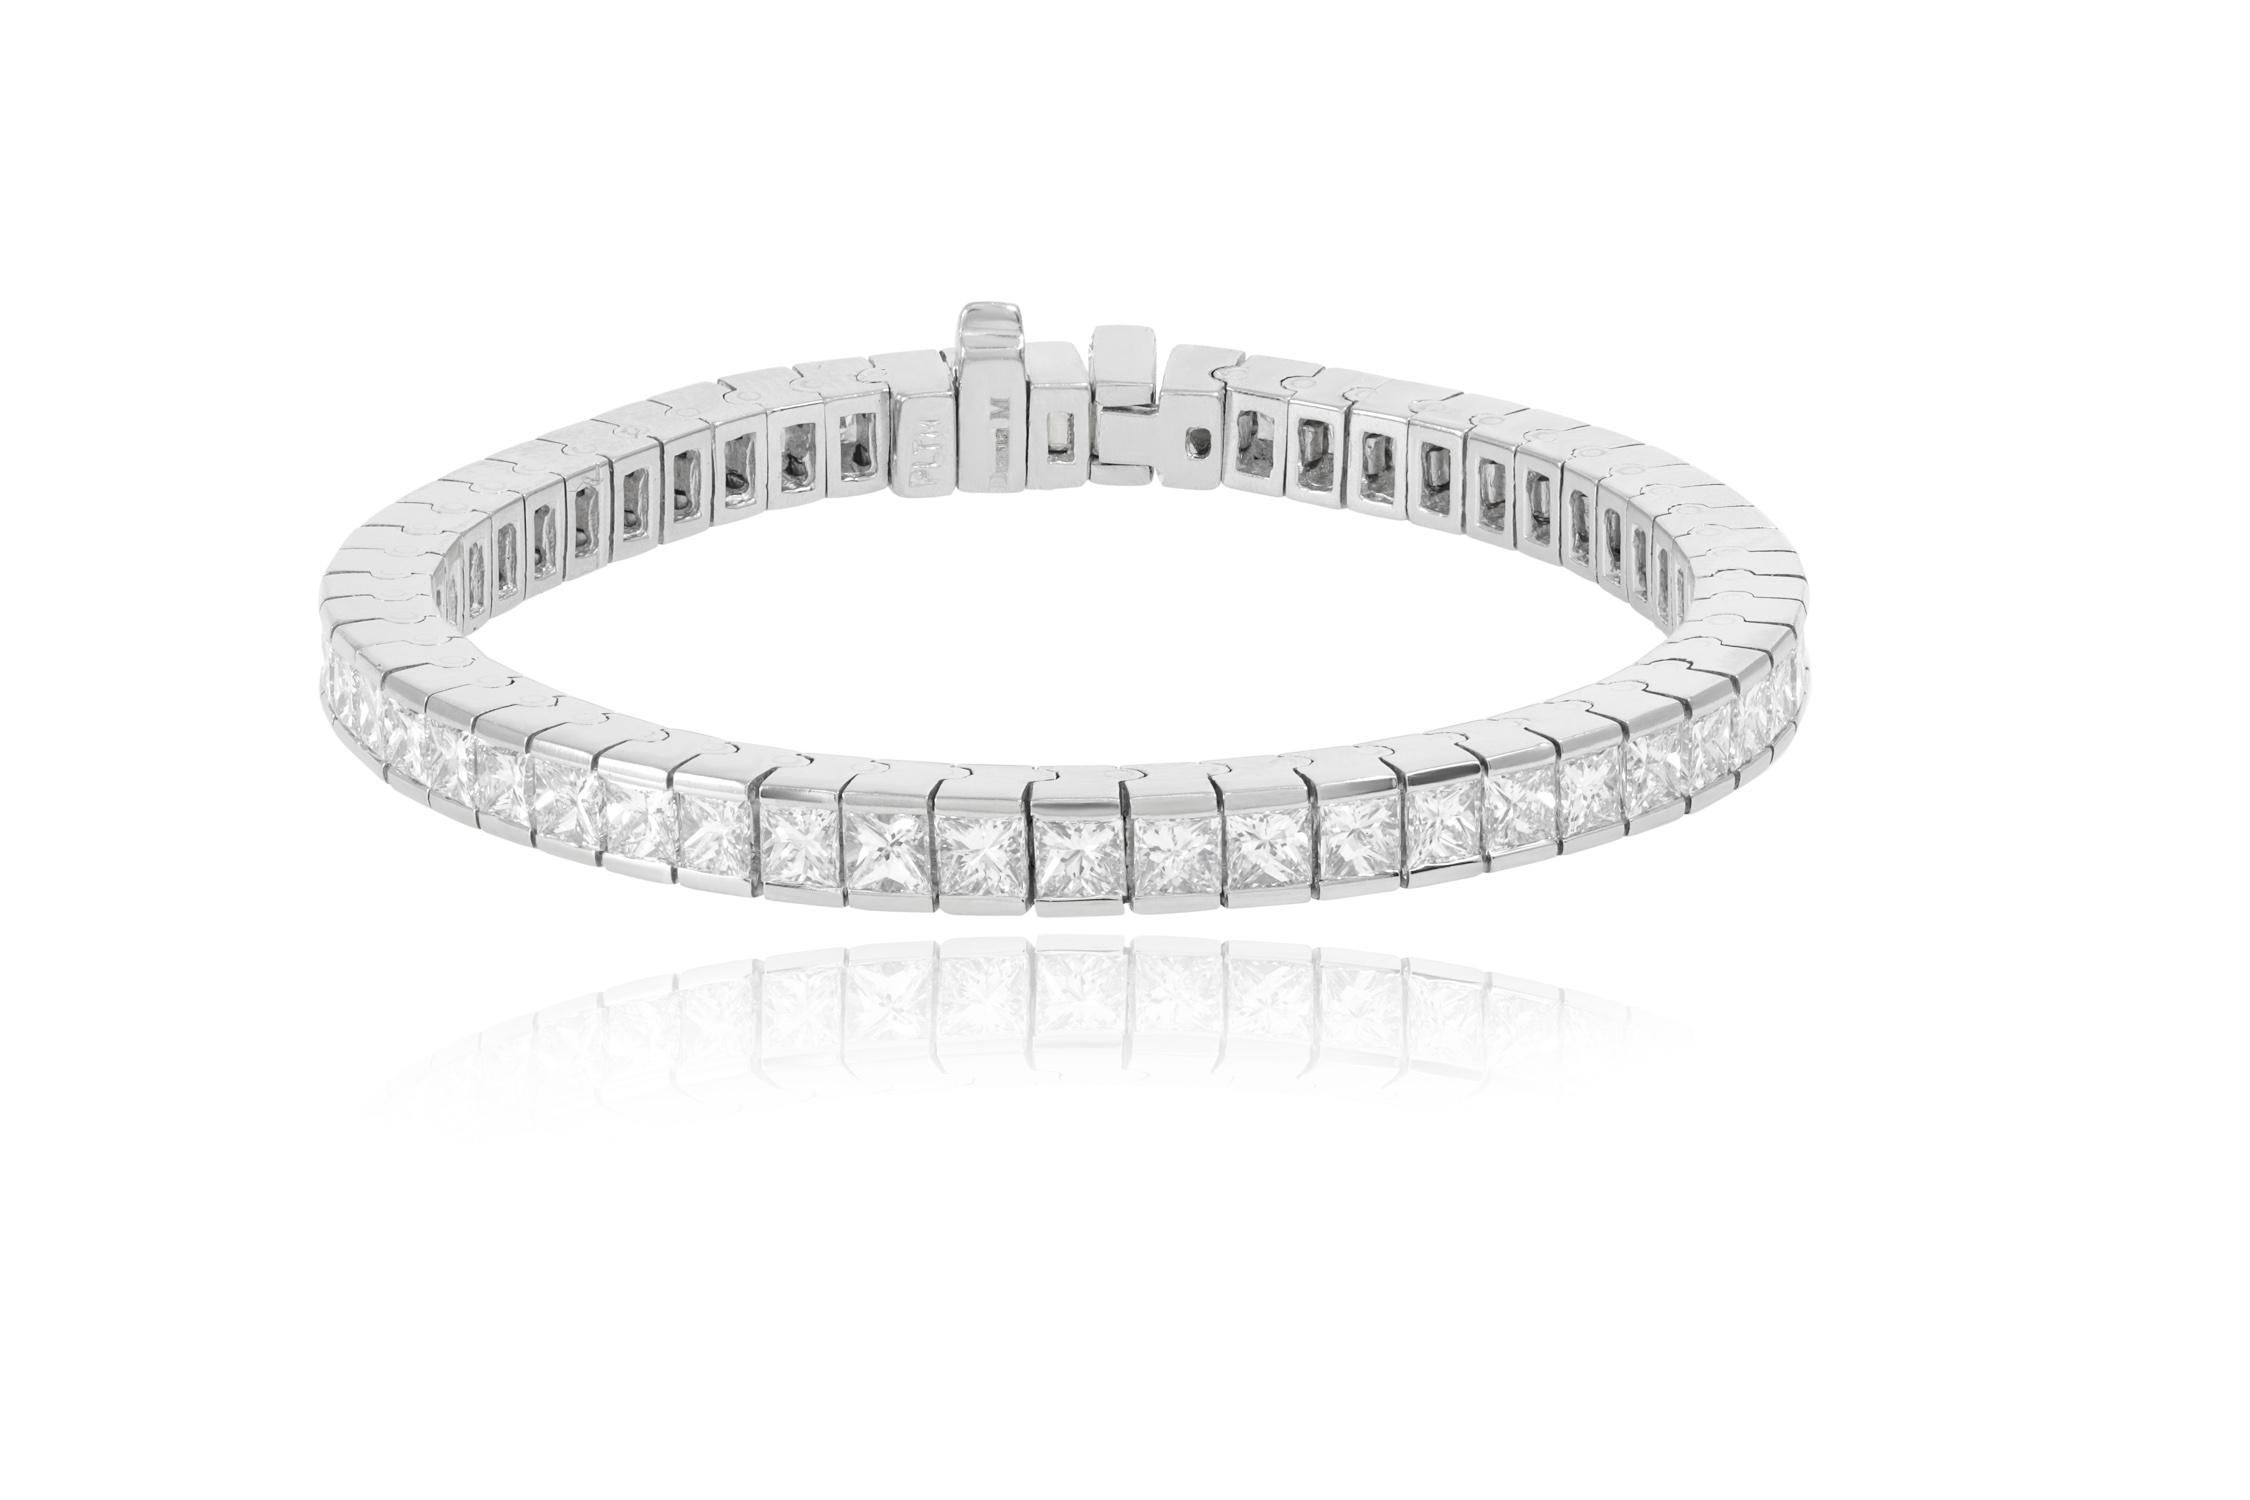 Platinum diamond tennis bracelet adorned with 12.50 cts tw of channel set princess cut diamonds (54 stones)
Diana M. is a leading supplier of top-quality fine jewelry for over 35 years.
Diana M is one-stop shop for all your jewelry shopping,